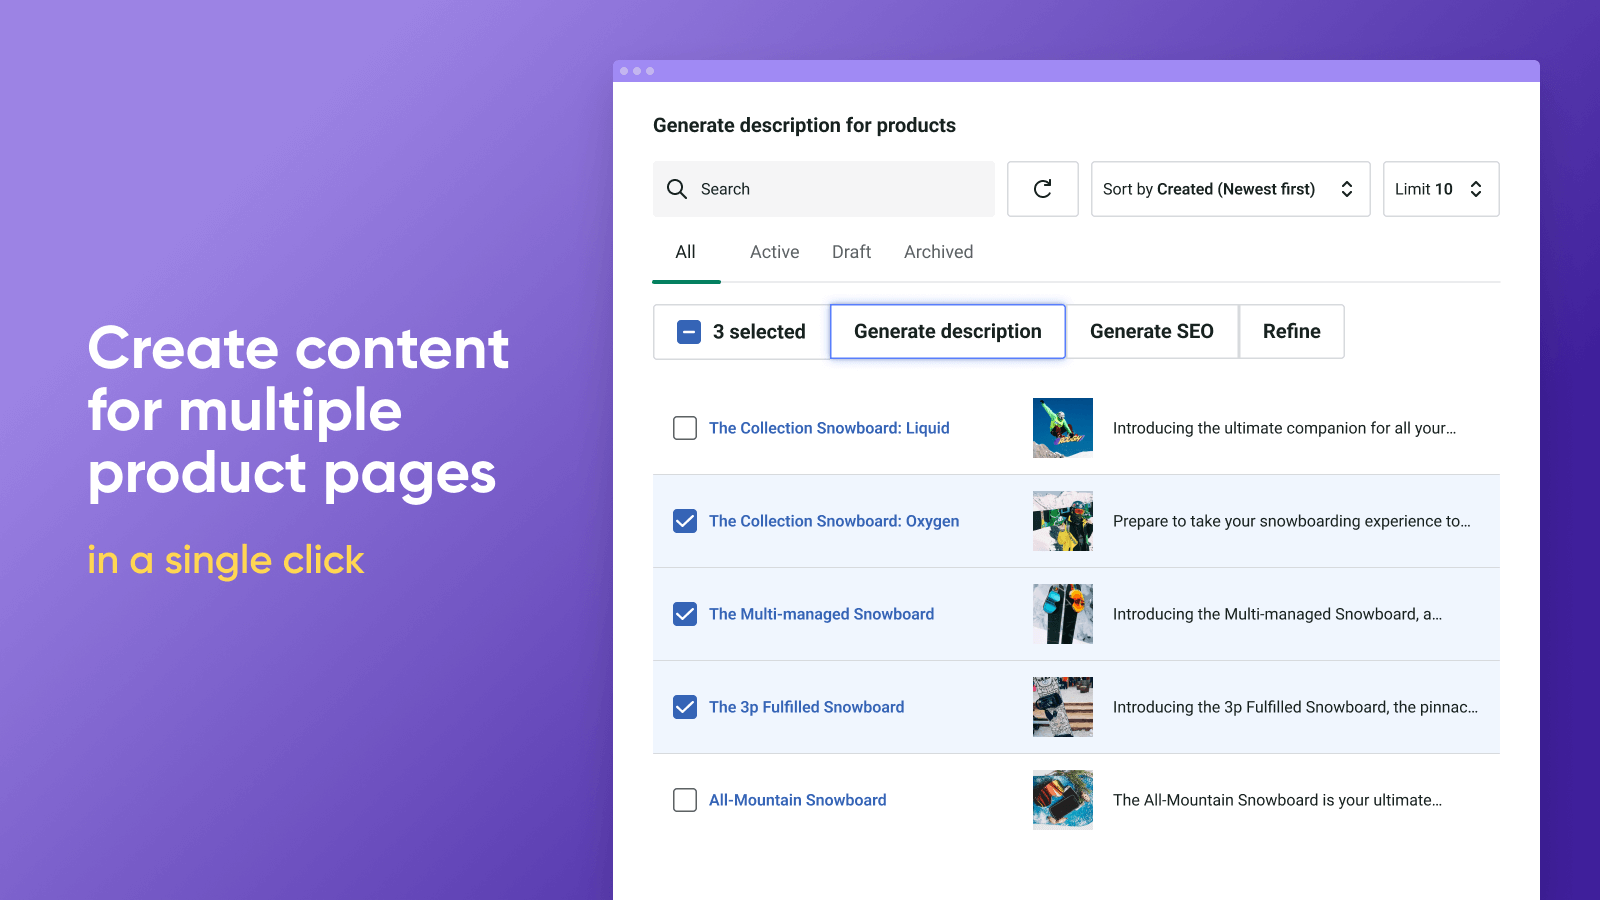 Create content for multiple product pages in a single click